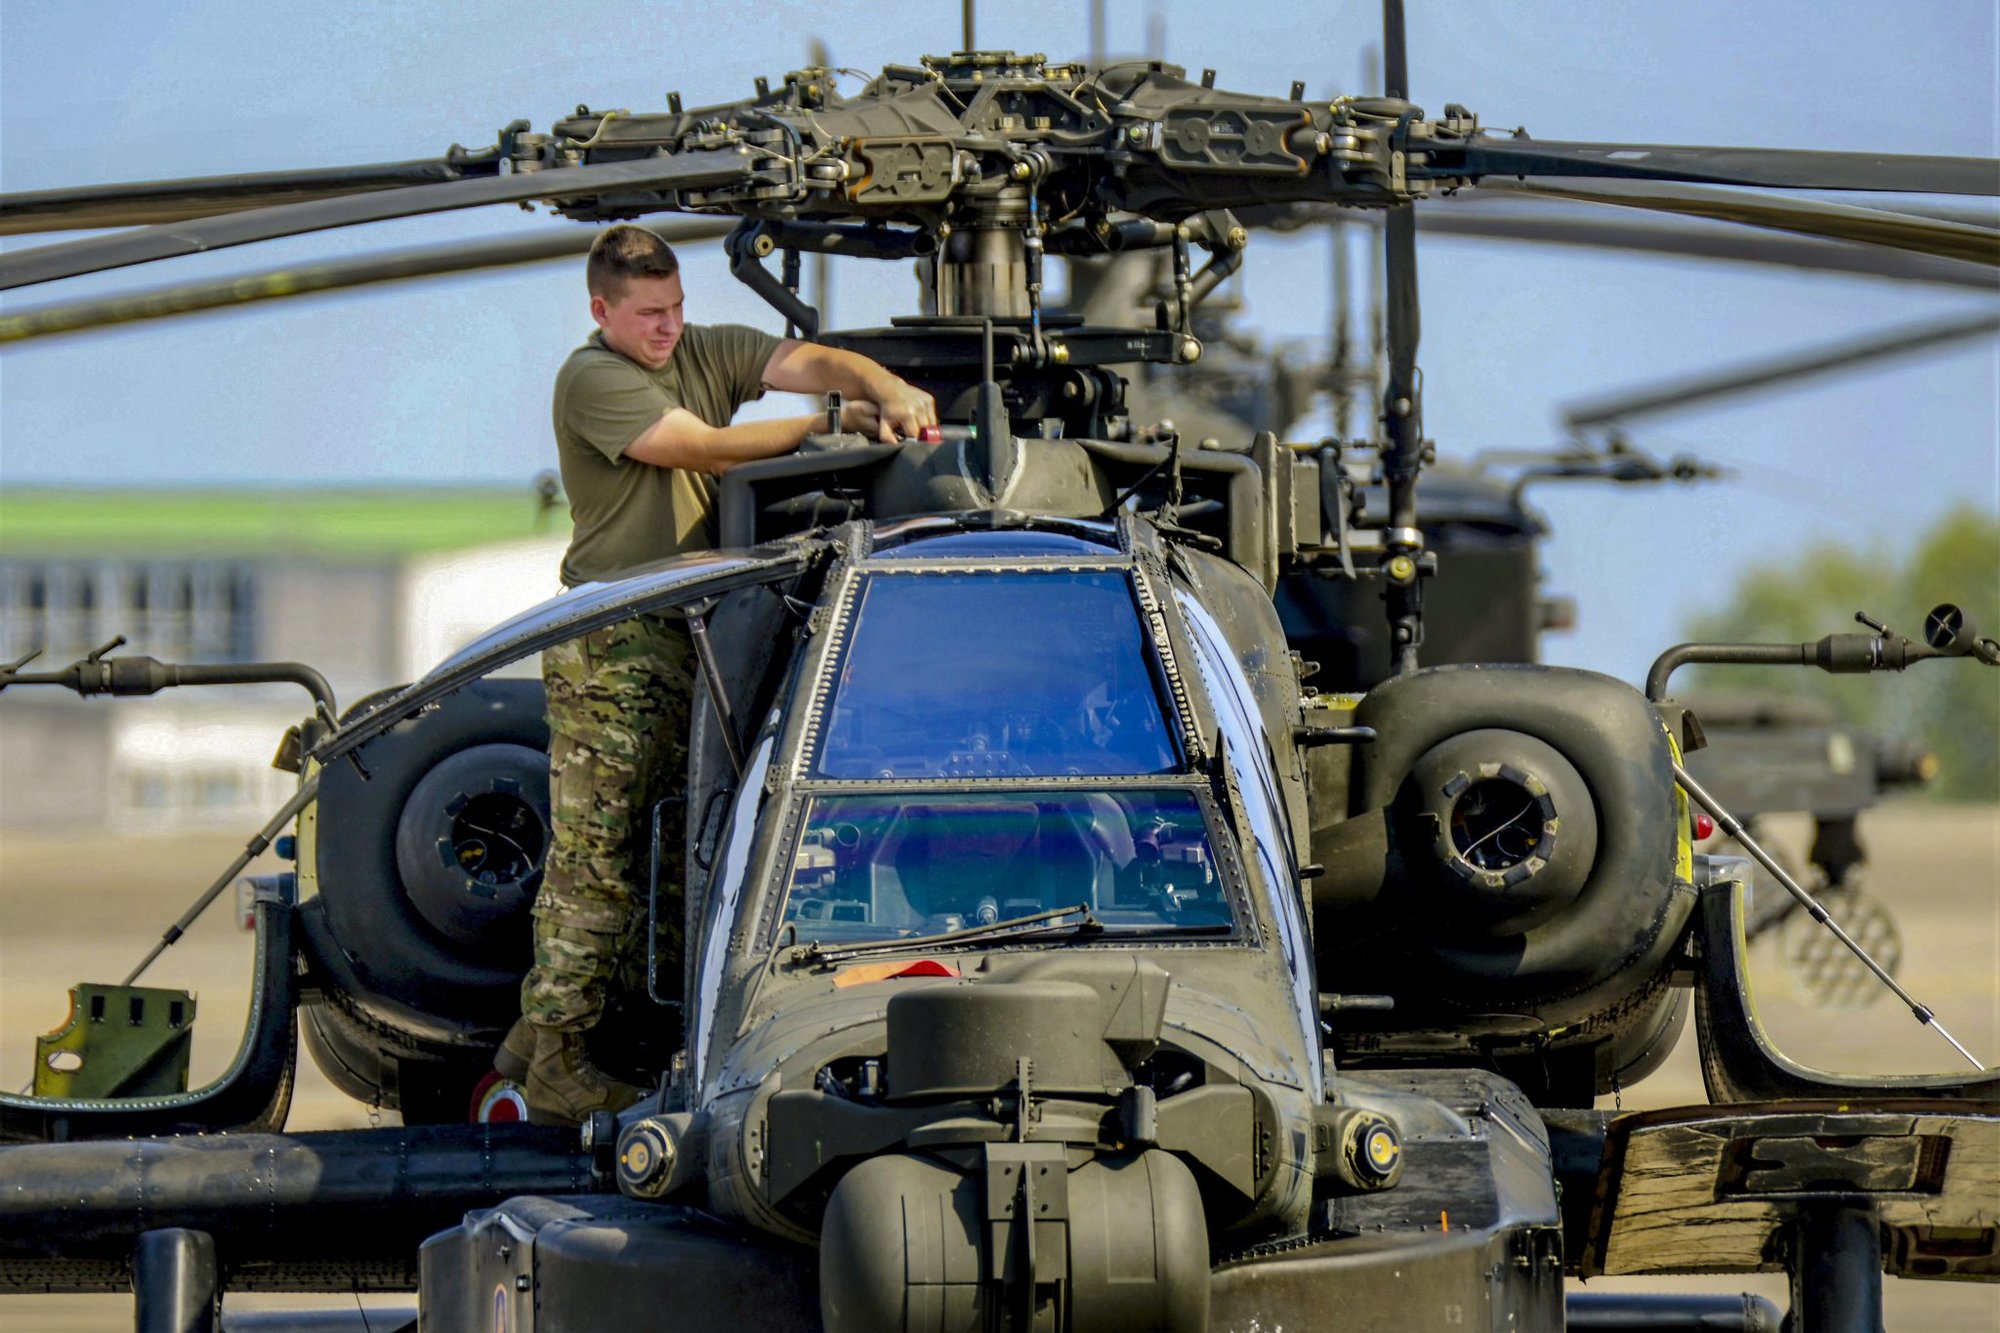 A U.S. Soldier with D Company, 1st Battalion, 3rd Aviation Regiment (Attack Reconnaissance), 12th Combat Aviation Brigade, conducts routine maintenance on a AH-64 Apache helicopter on Aug. 29, 2018, at Katterbach Army Airfield in Ansbach, Germany. Photo by Charles Rosemond